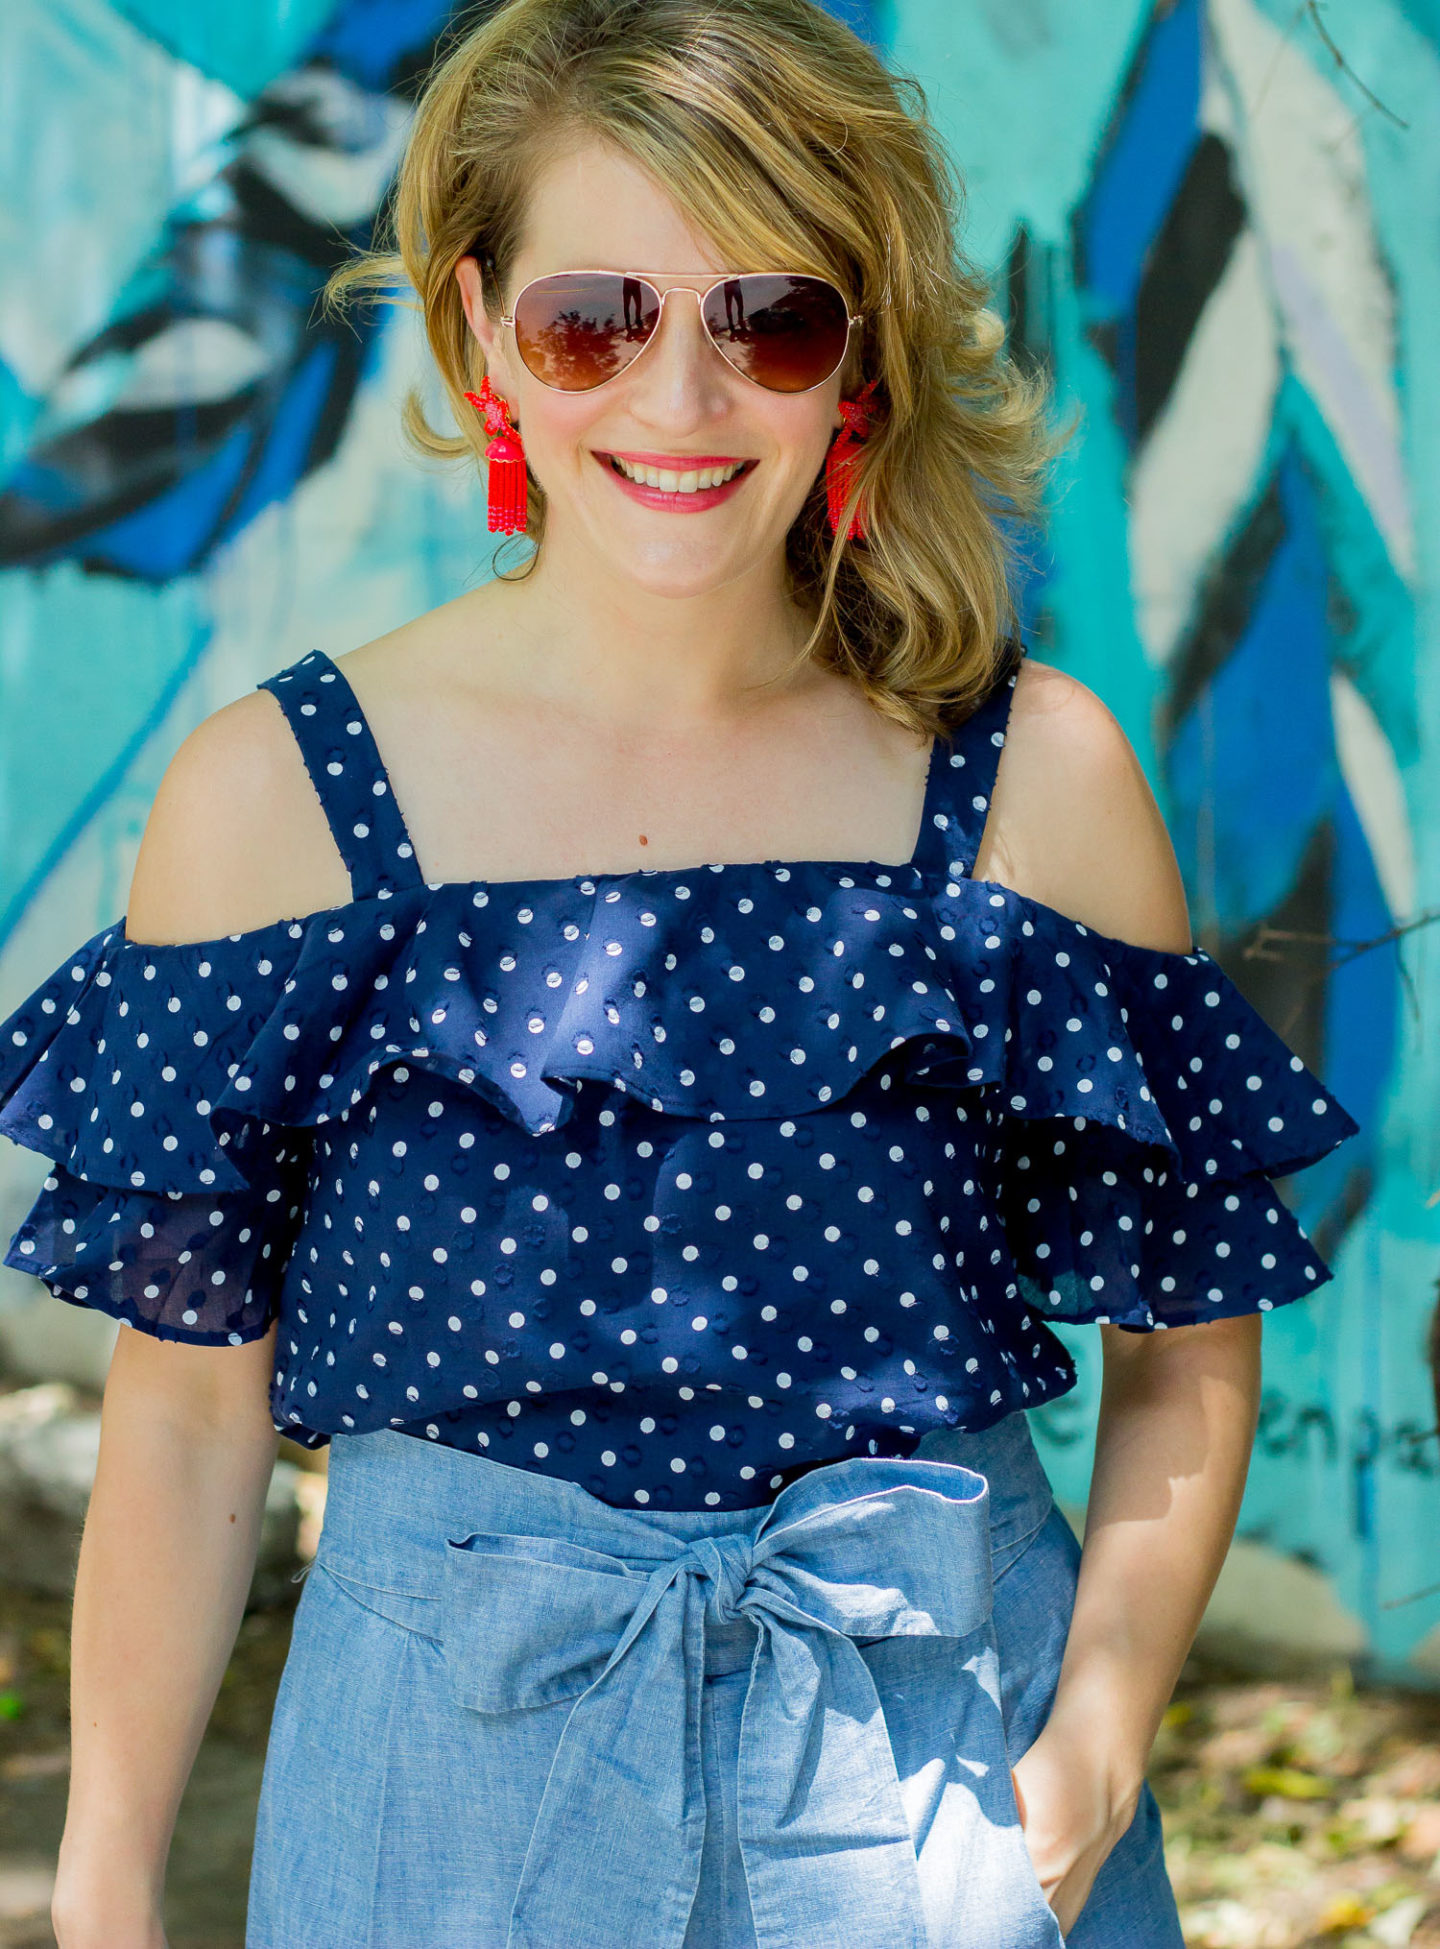 High-waisted shorts worn by Elise Giannasi of Belle Meets World blog